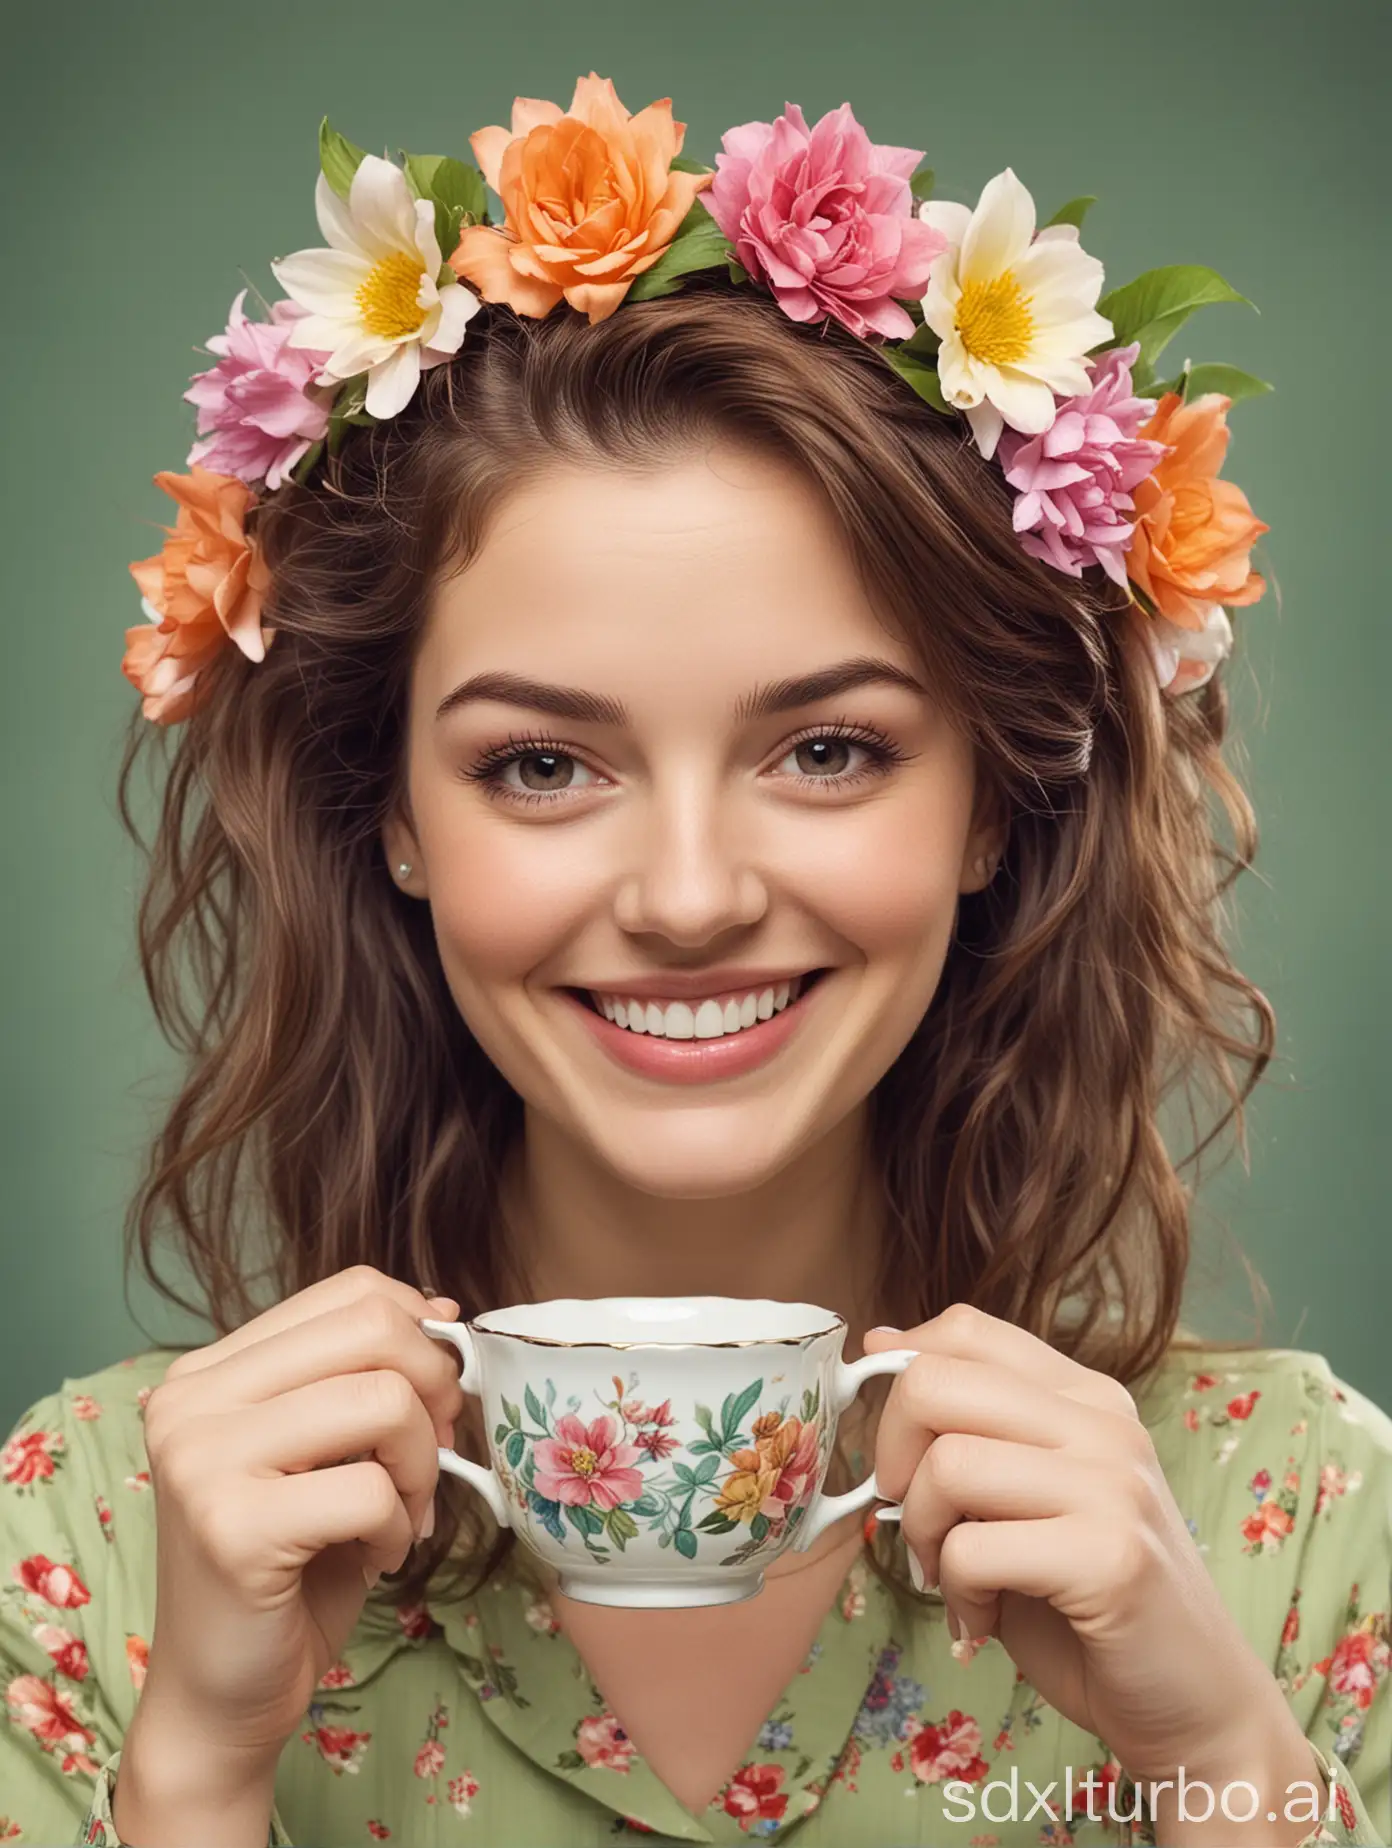 Cheerful-Woman-Enjoying-Tea-with-a-Flower-in-Her-Hair